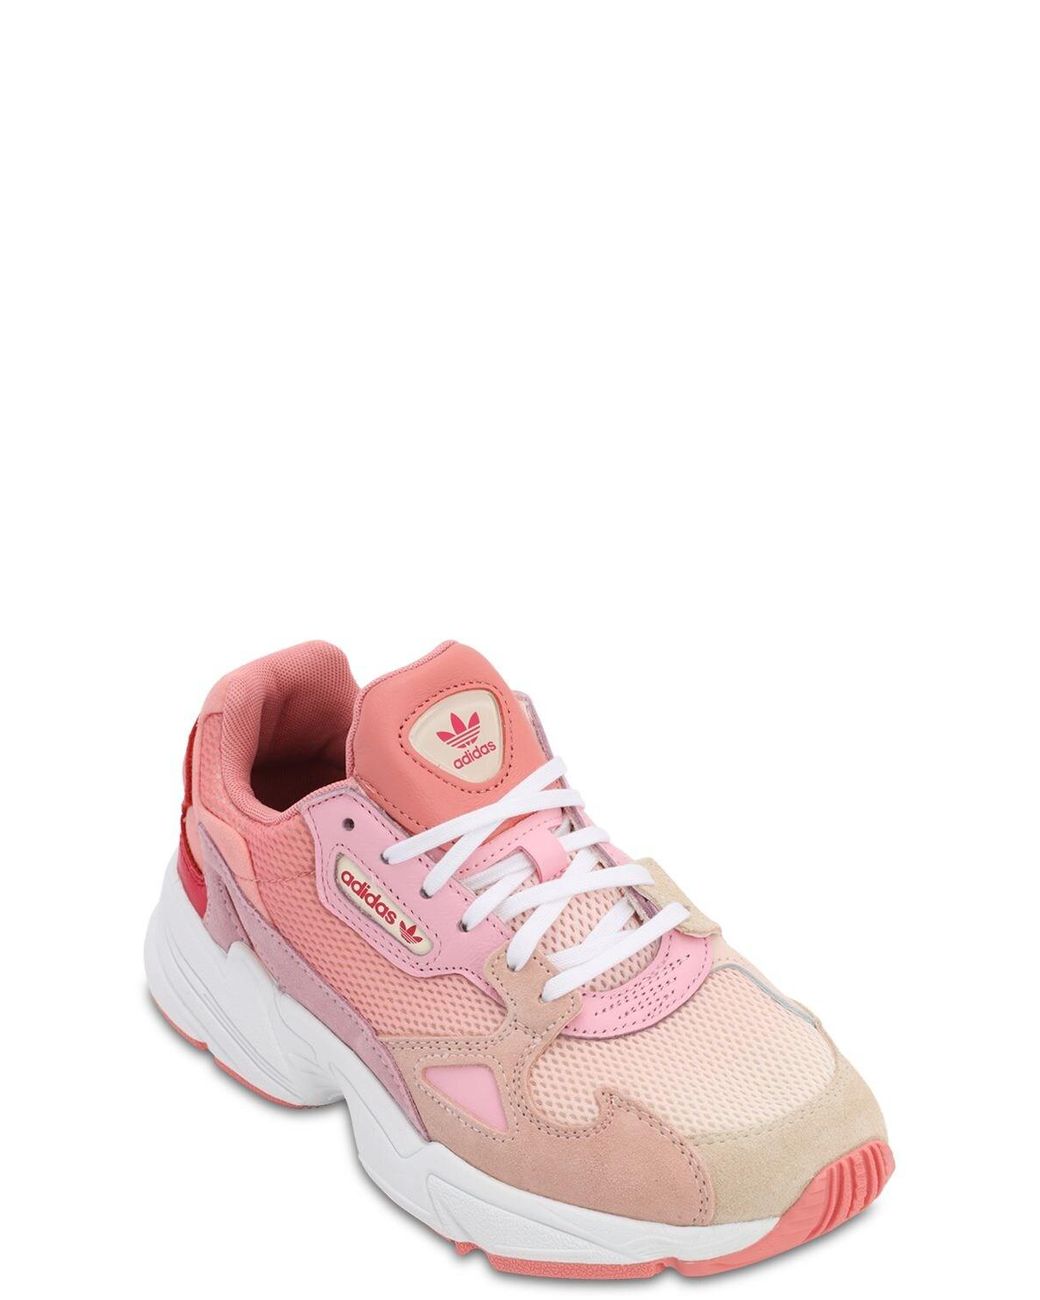 adidas Originals Leather Falcon in Peach/Peach (Pink) - Save 50% - Lyst